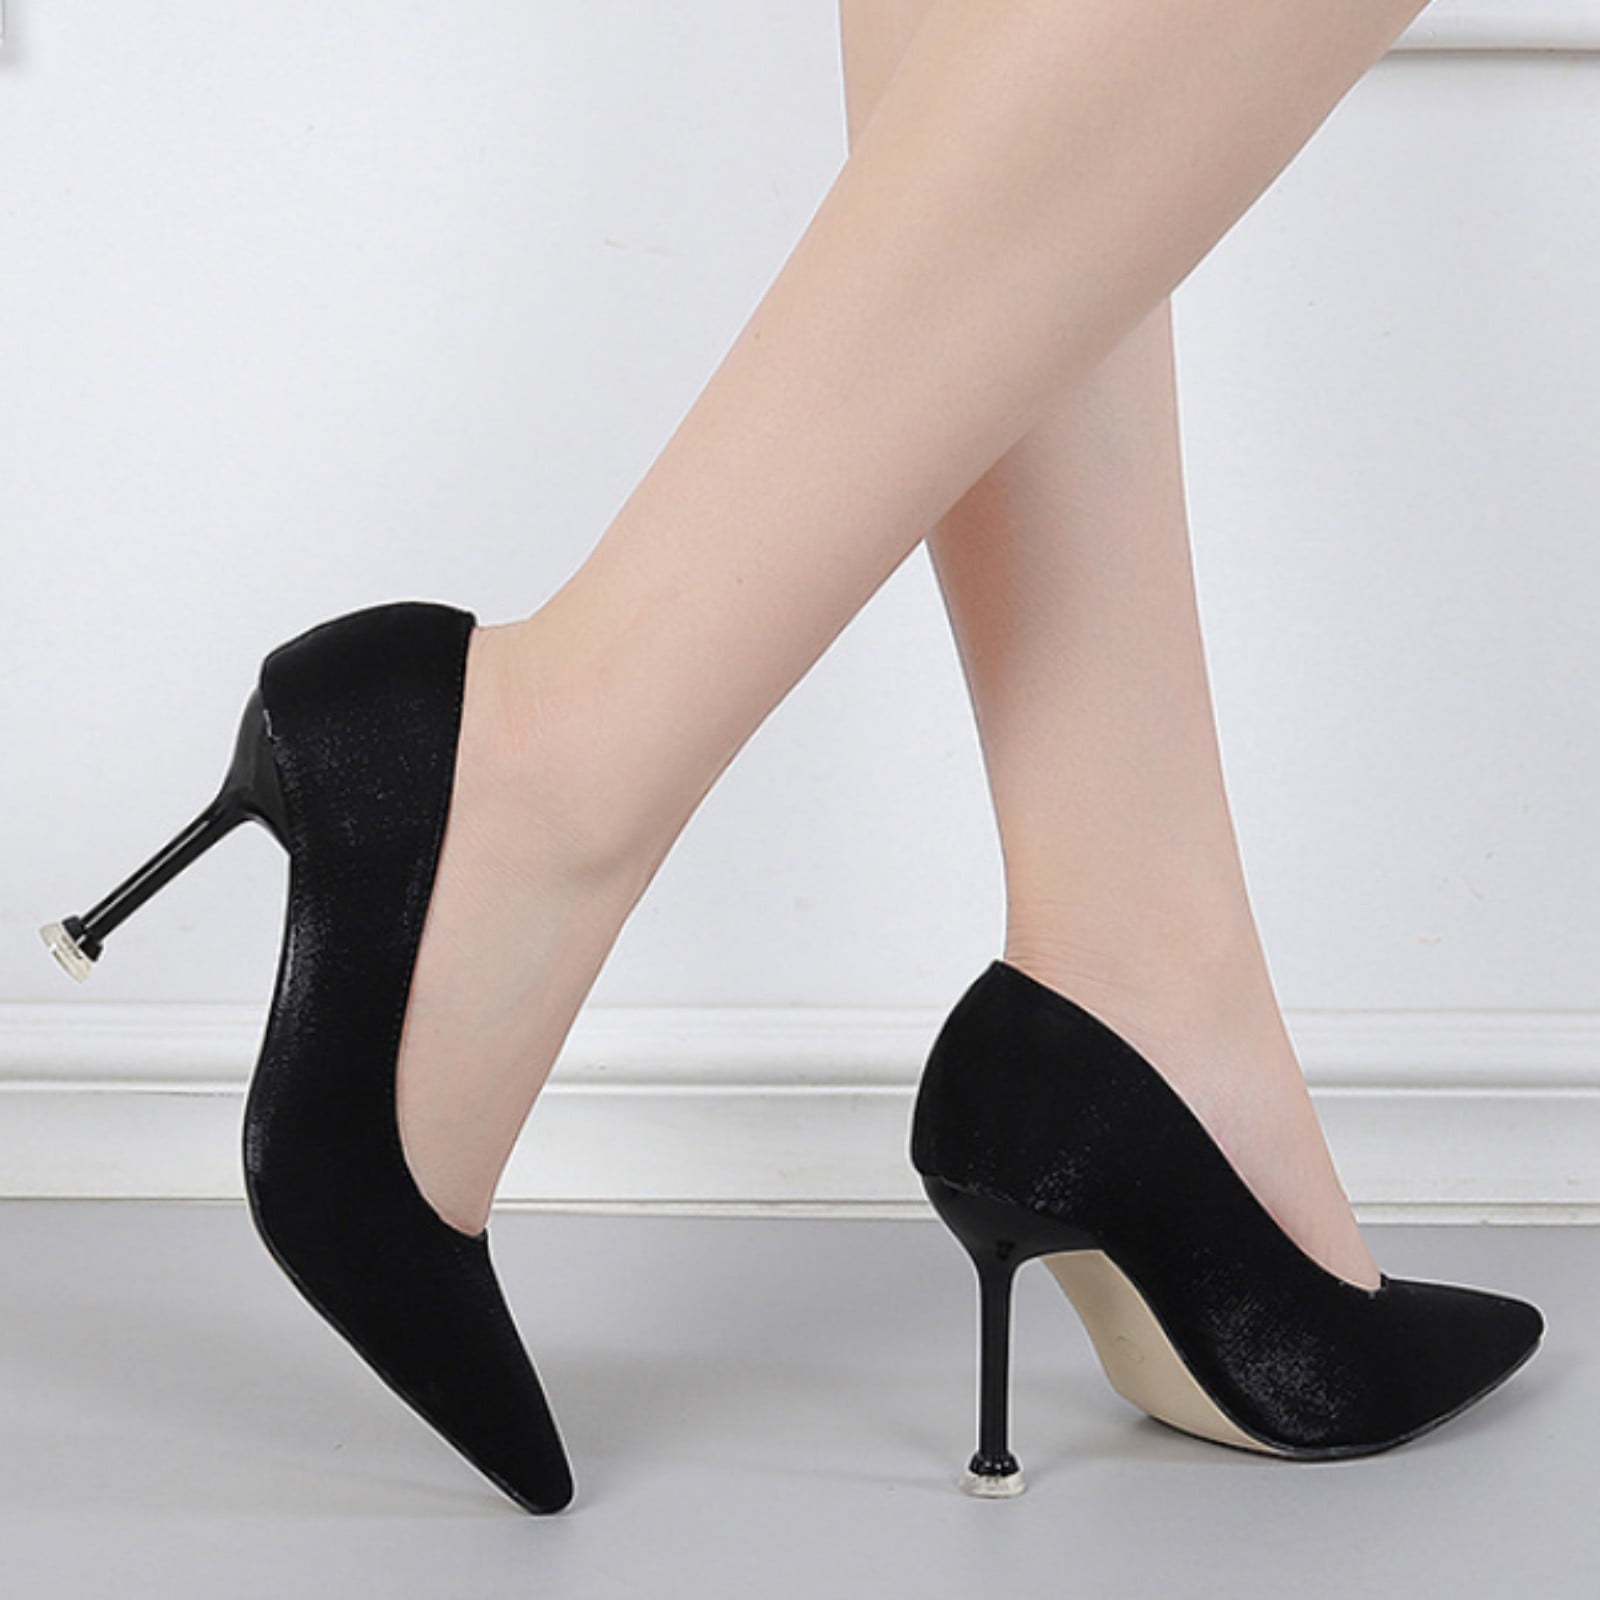 Buy Black Heel Shoes at Lowest Prices Online In India | Tata CLiQ-thanhphatduhoc.com.vn